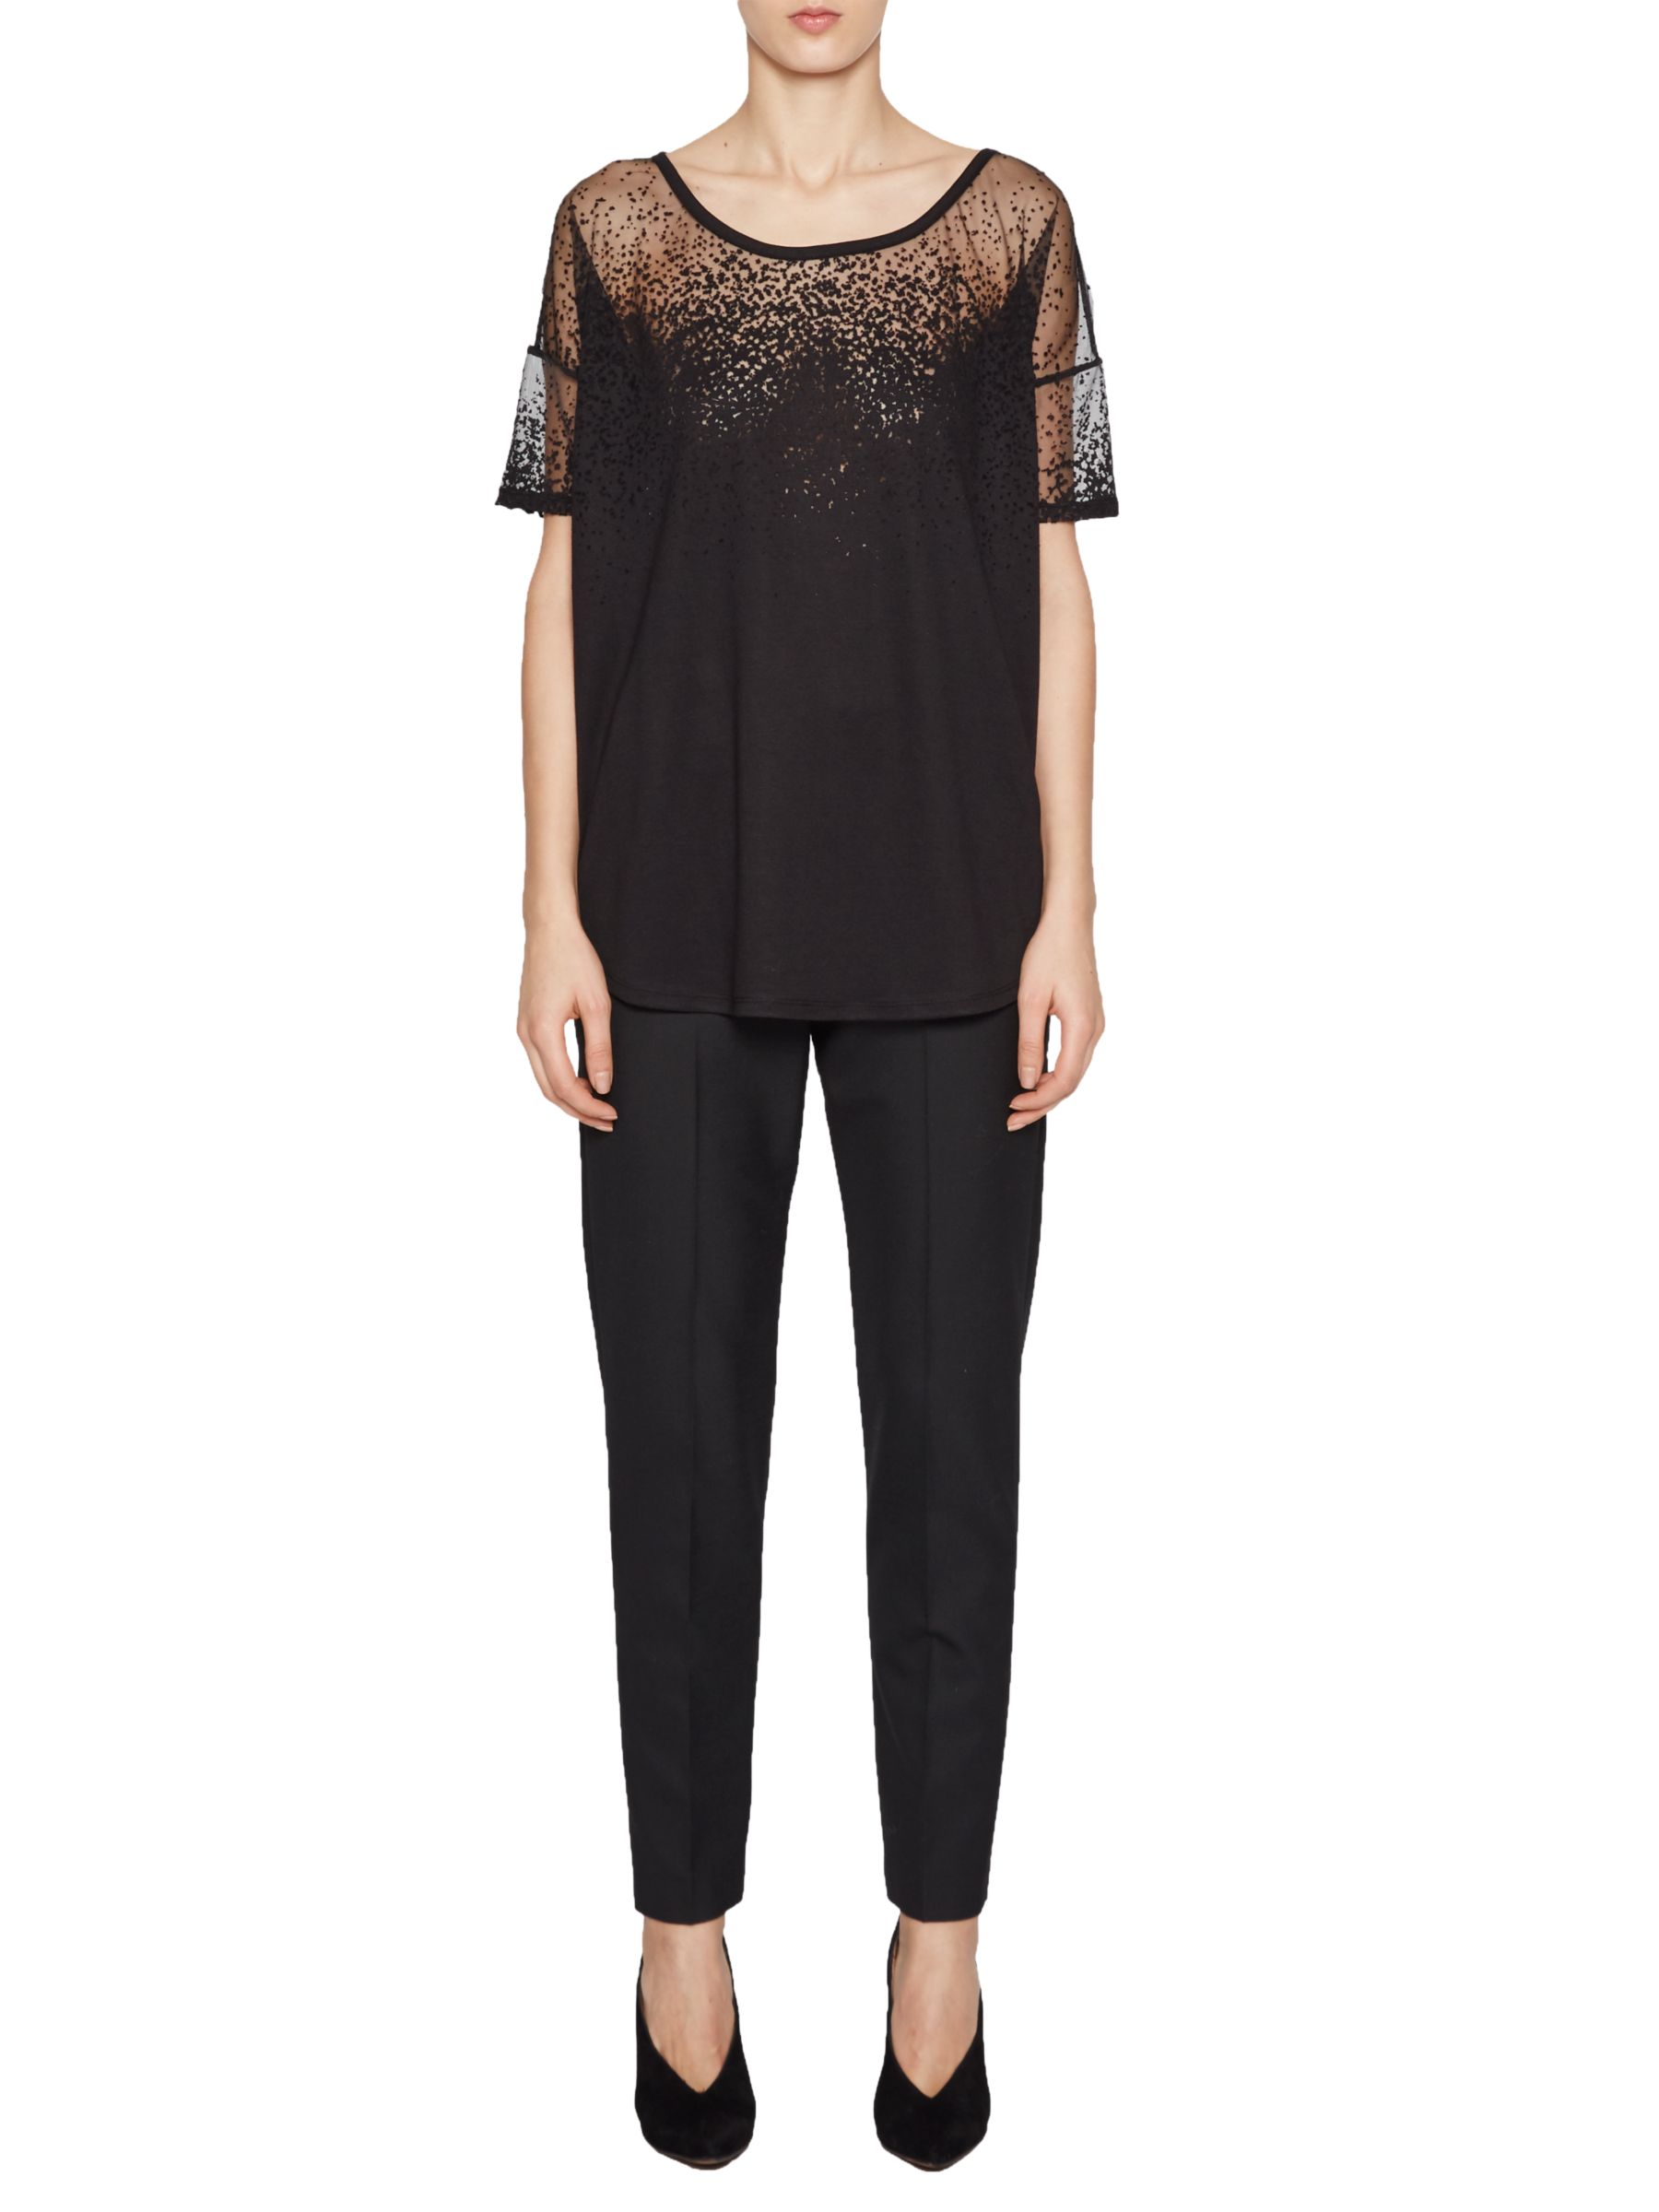 French Connection Sheer Space Jersey Round Neck Top, Black, XS